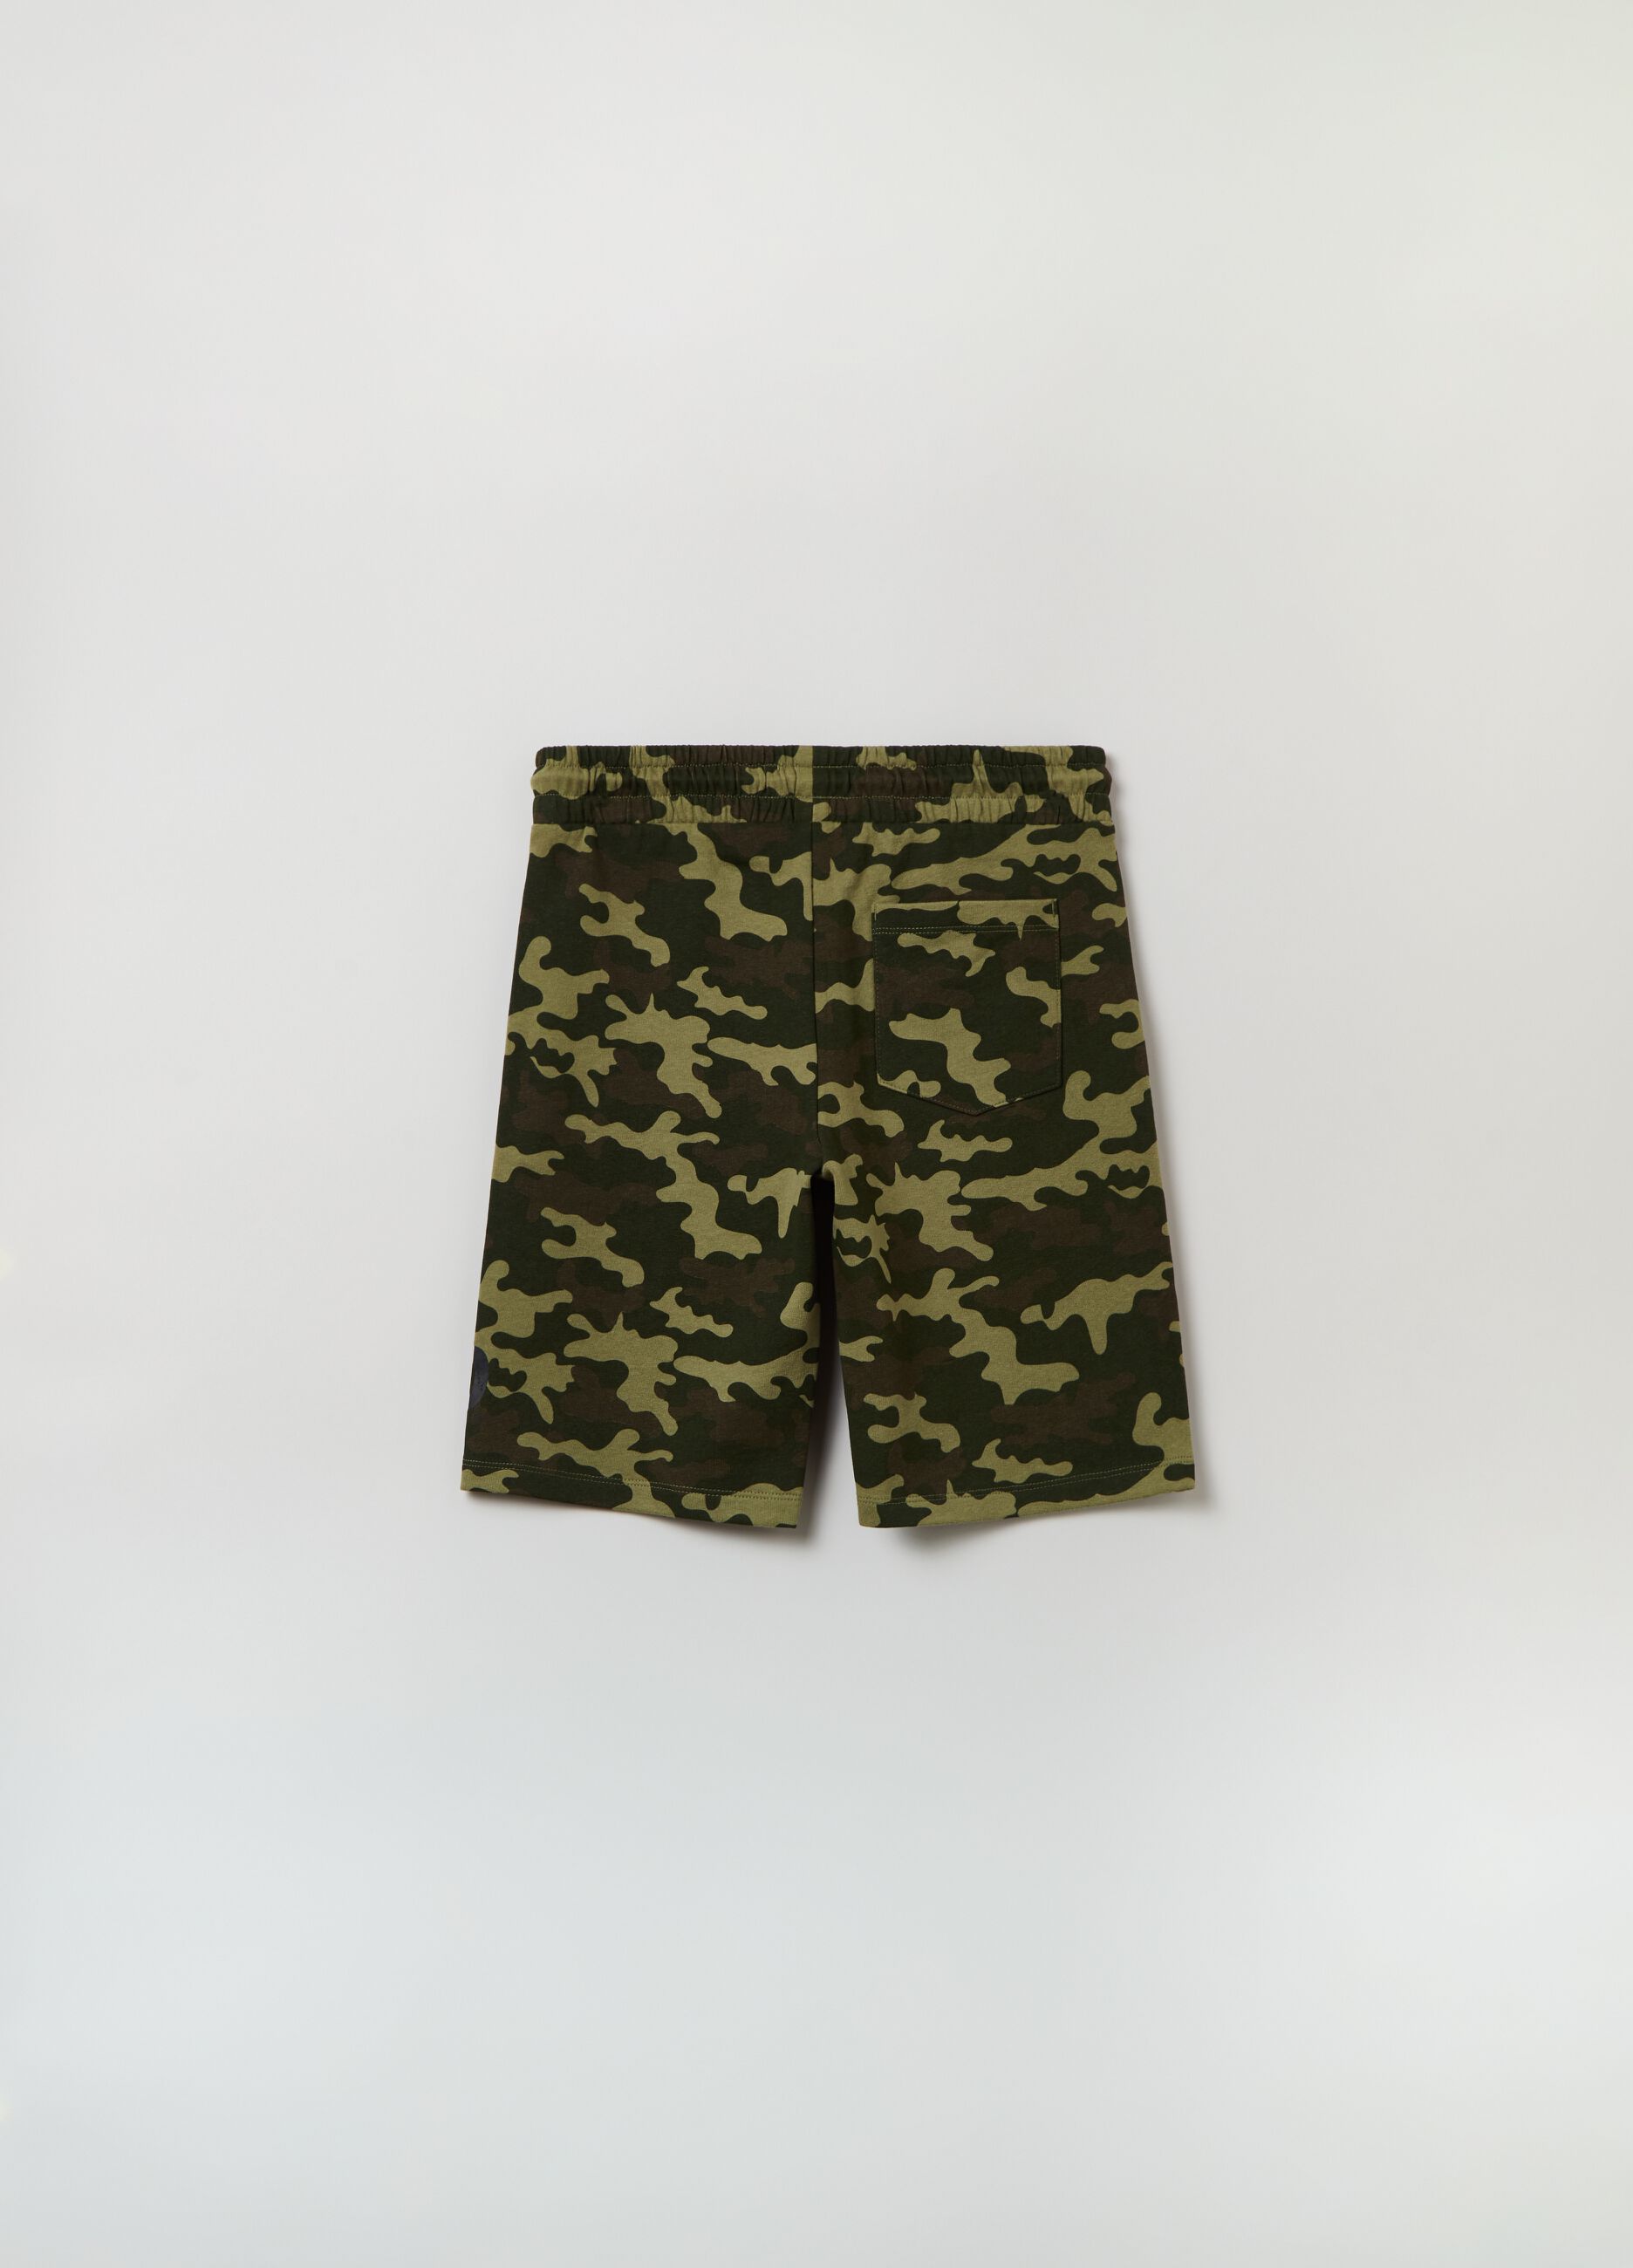 Camouflage Bermuda shorts with Jeep print